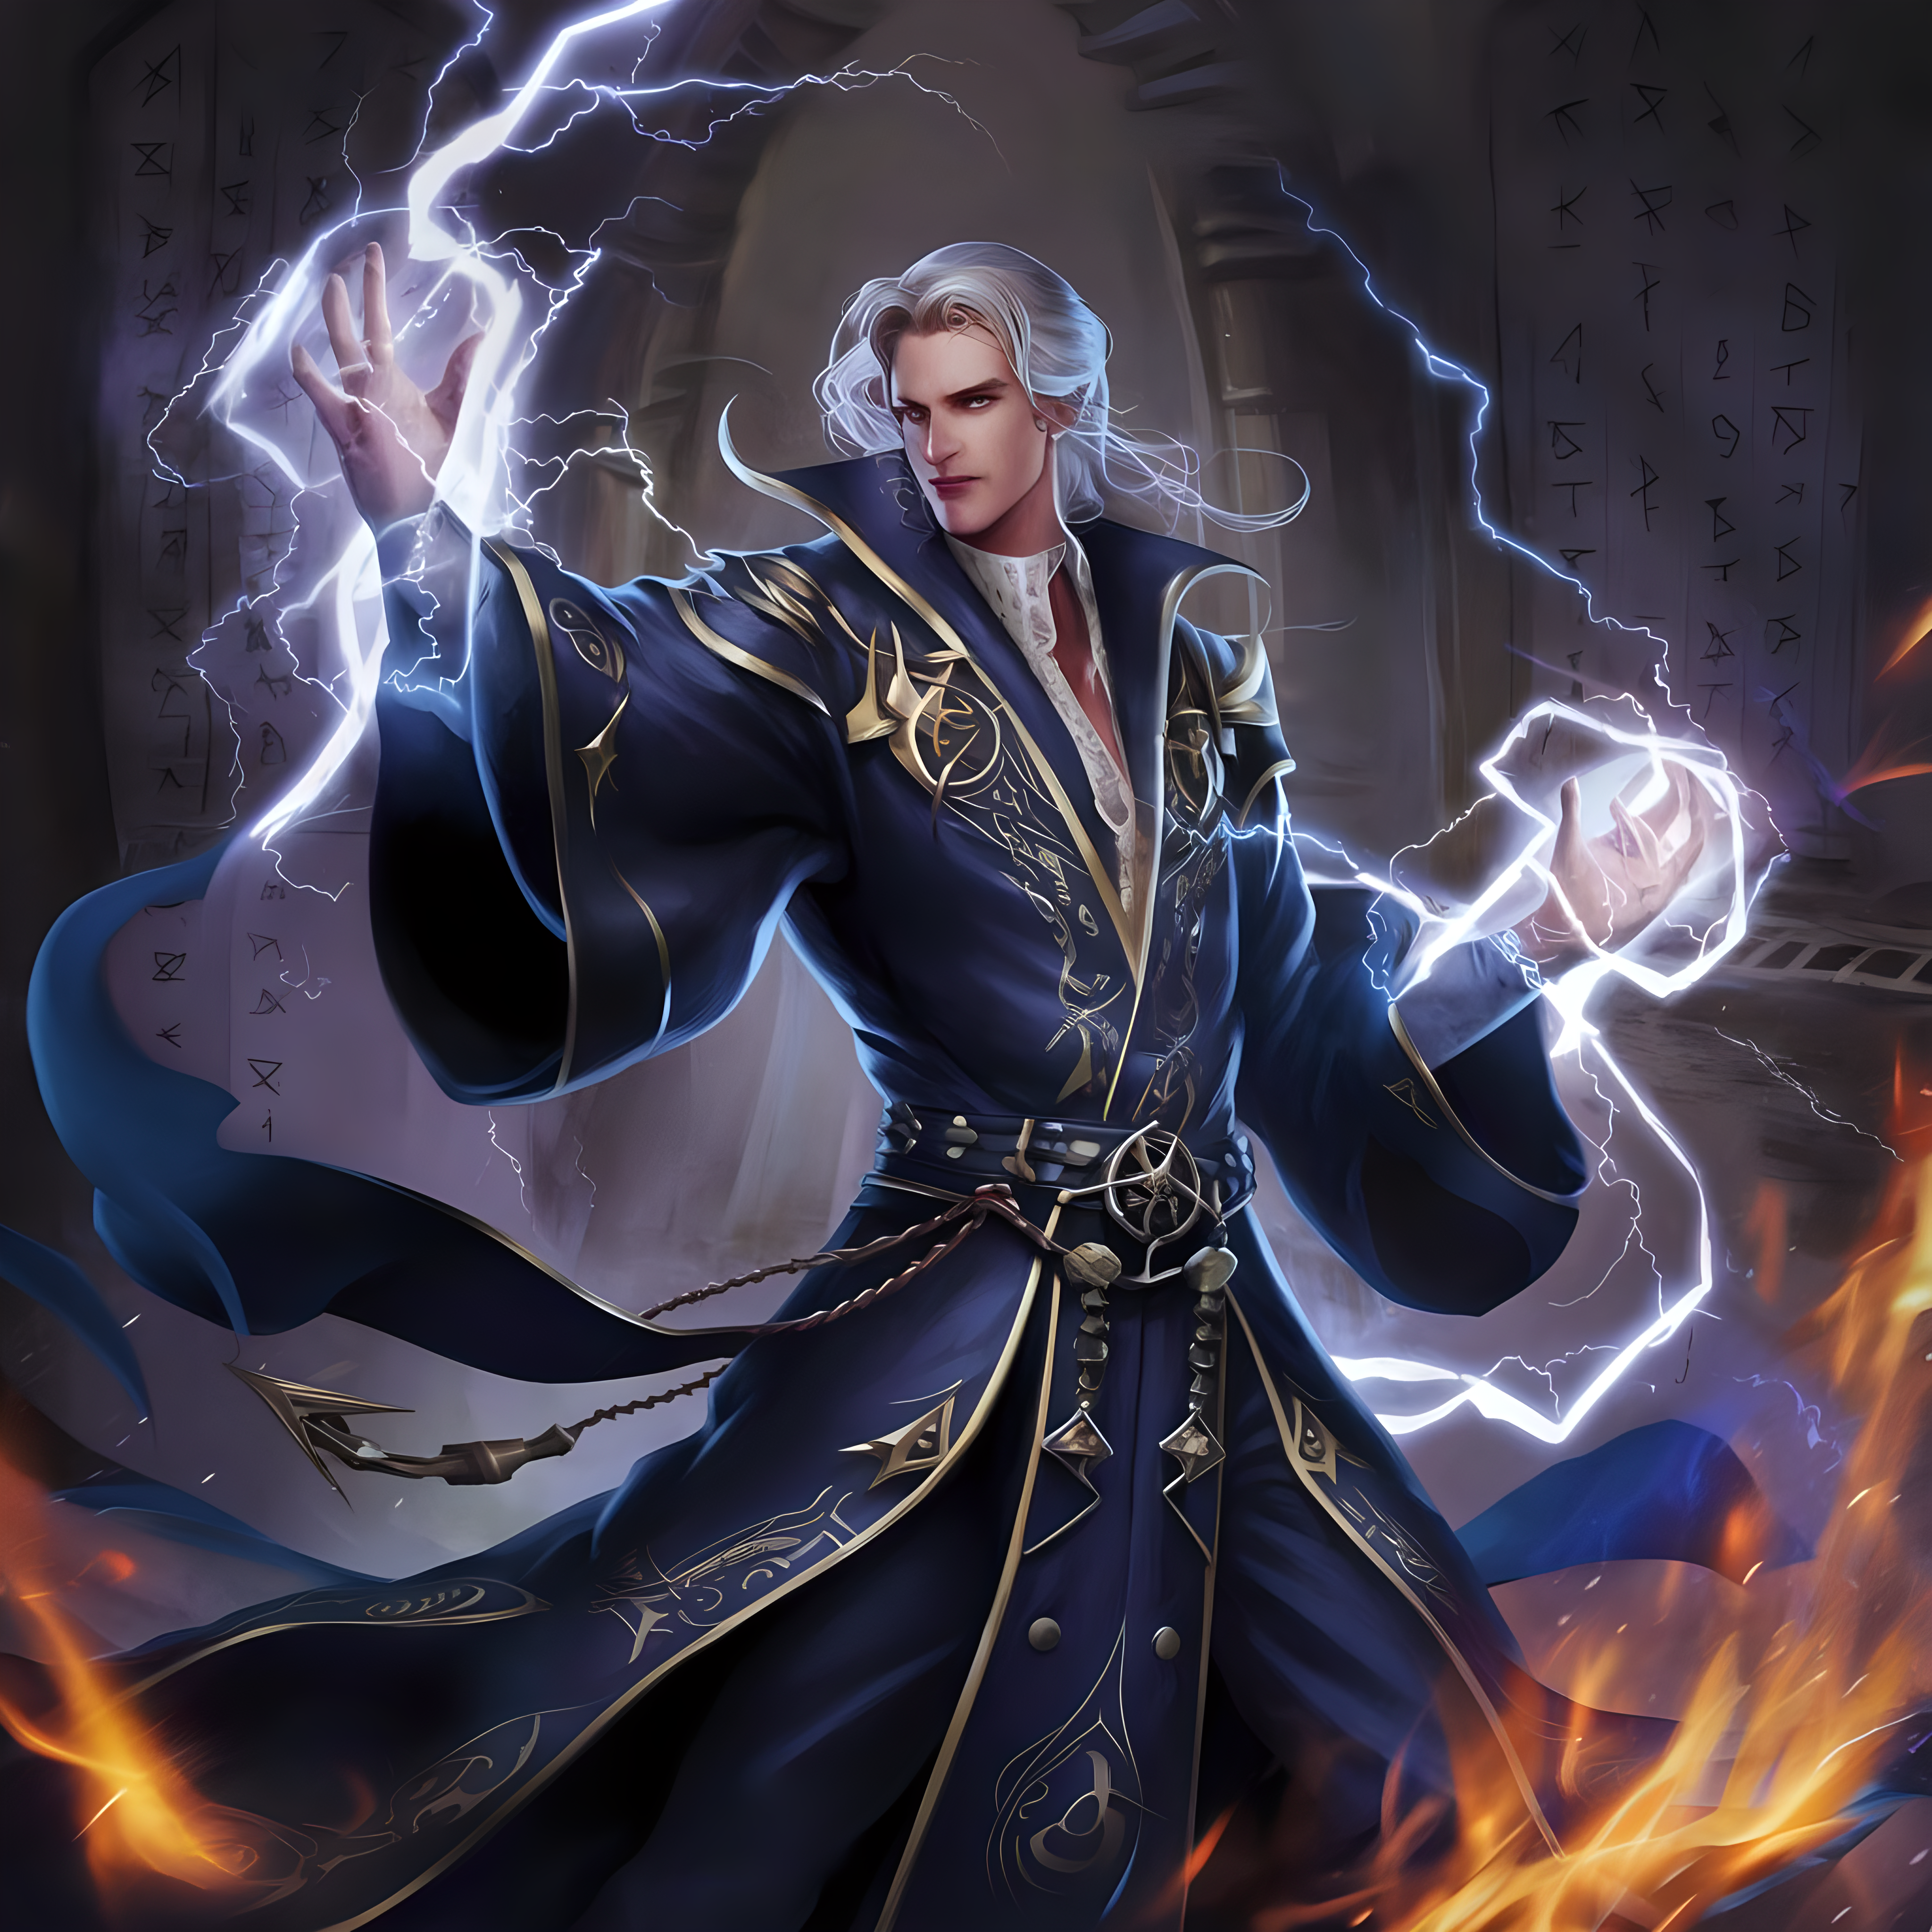 Sorcerer Man Manipulating Arcane Energies with Lightning and Flames